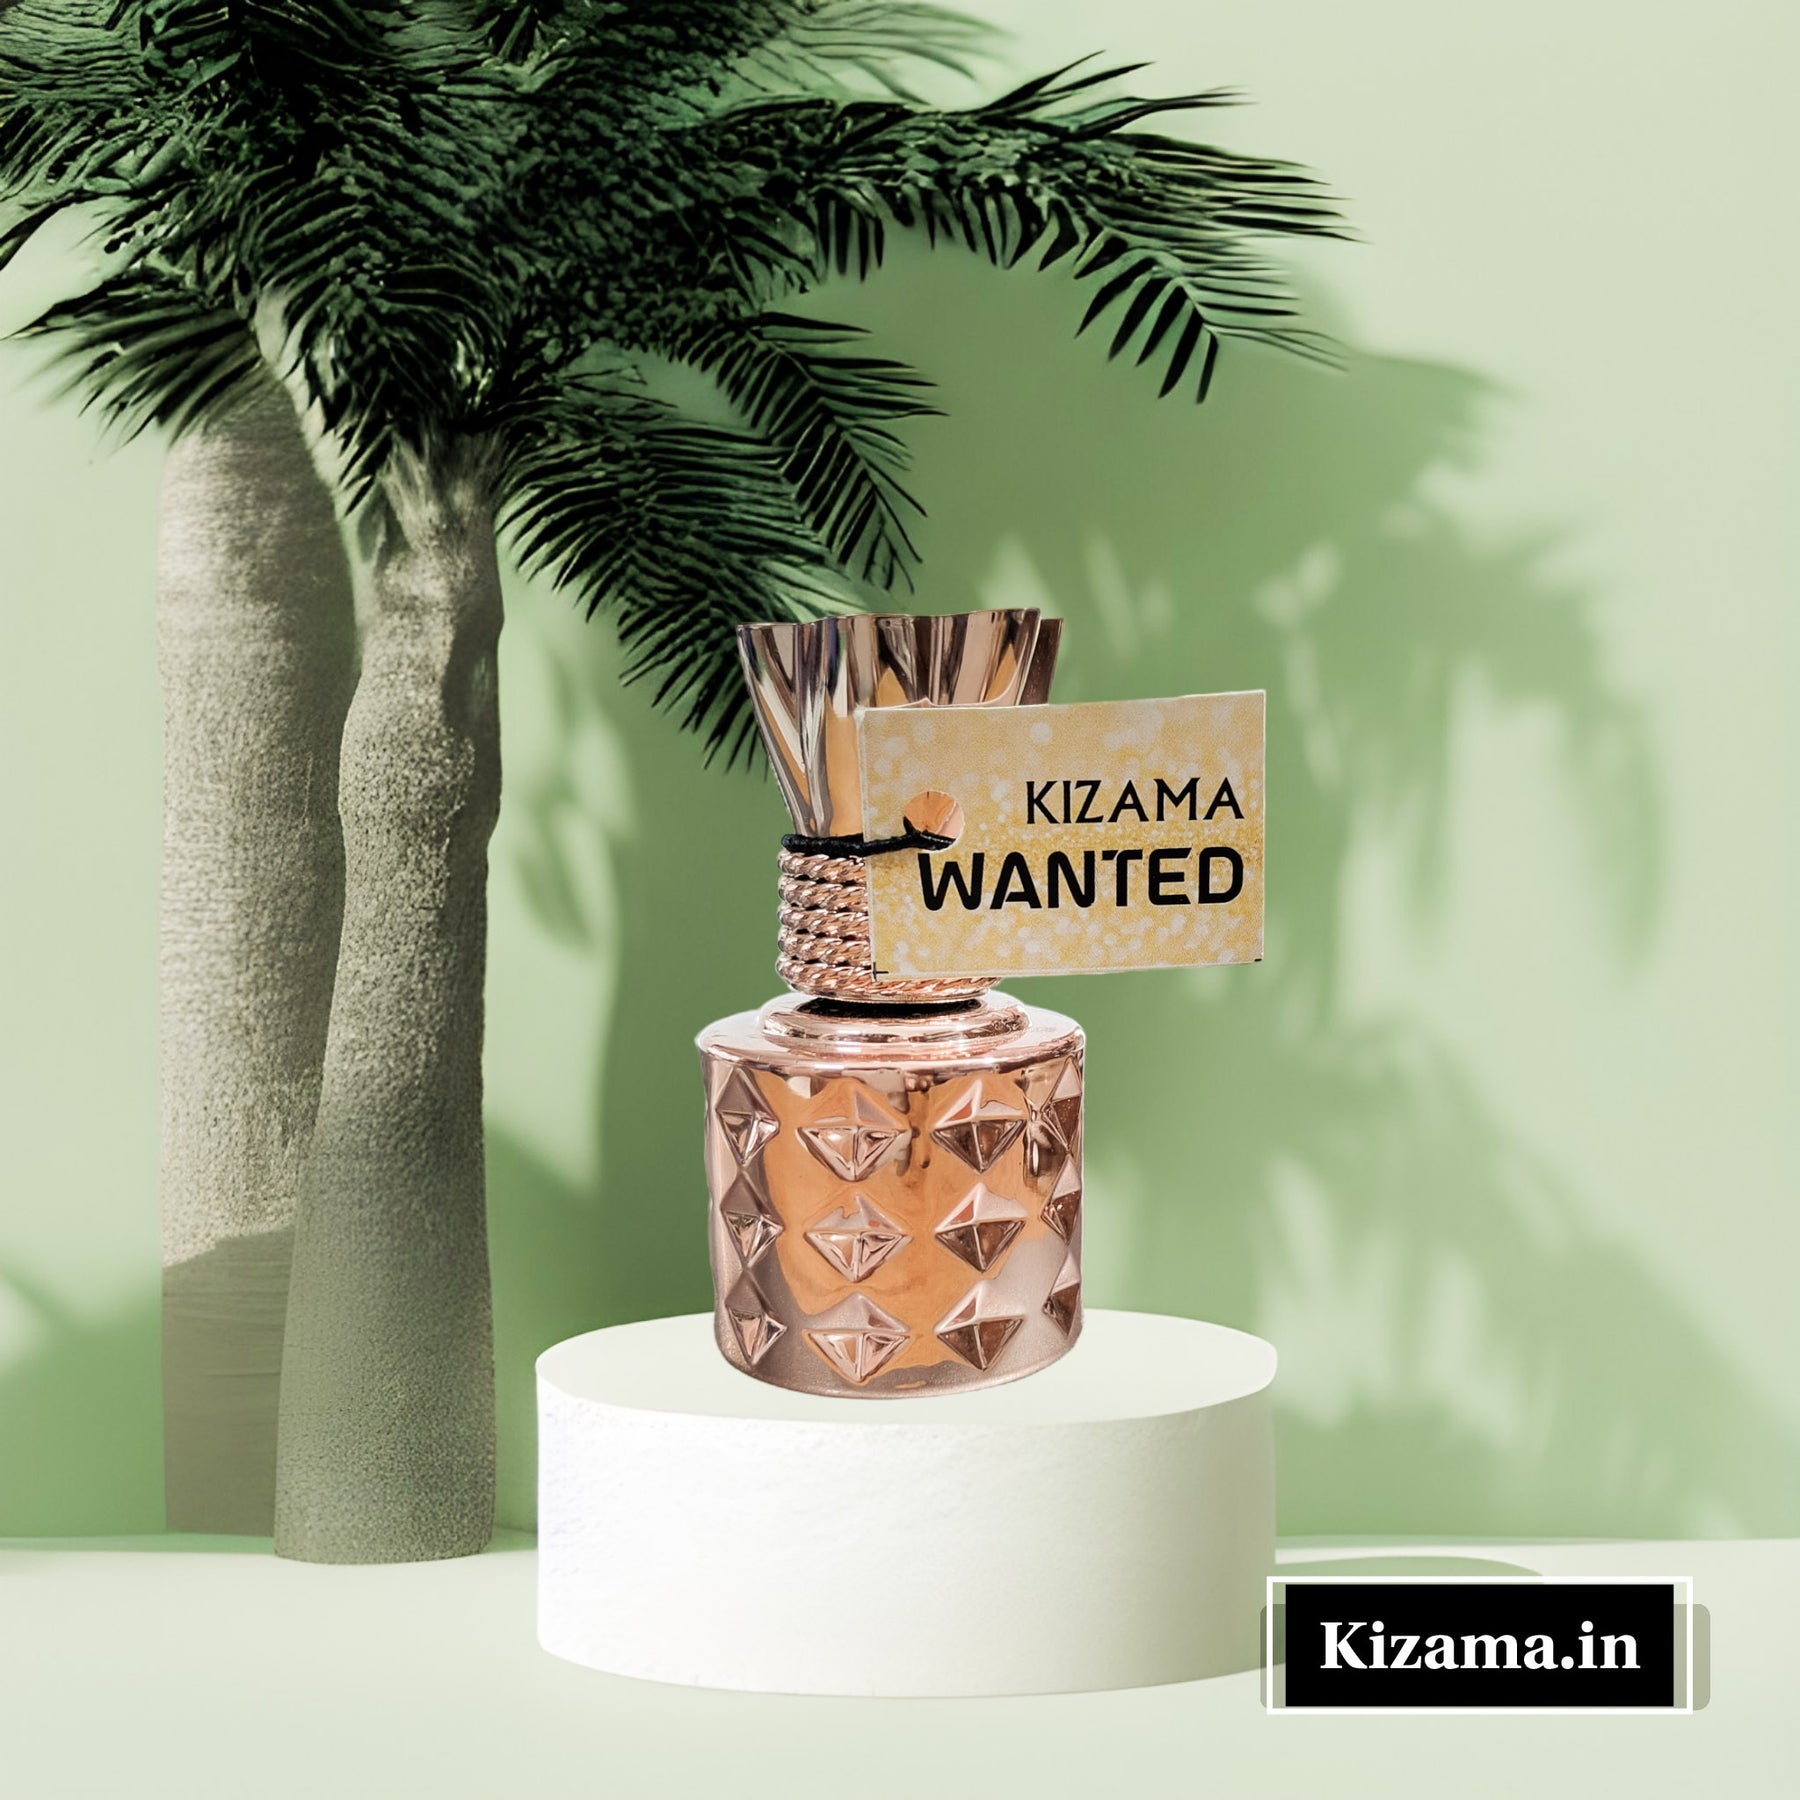 Kizama Wanted Attar for Men Inspired by Azzaro The Most Wanted Perfume